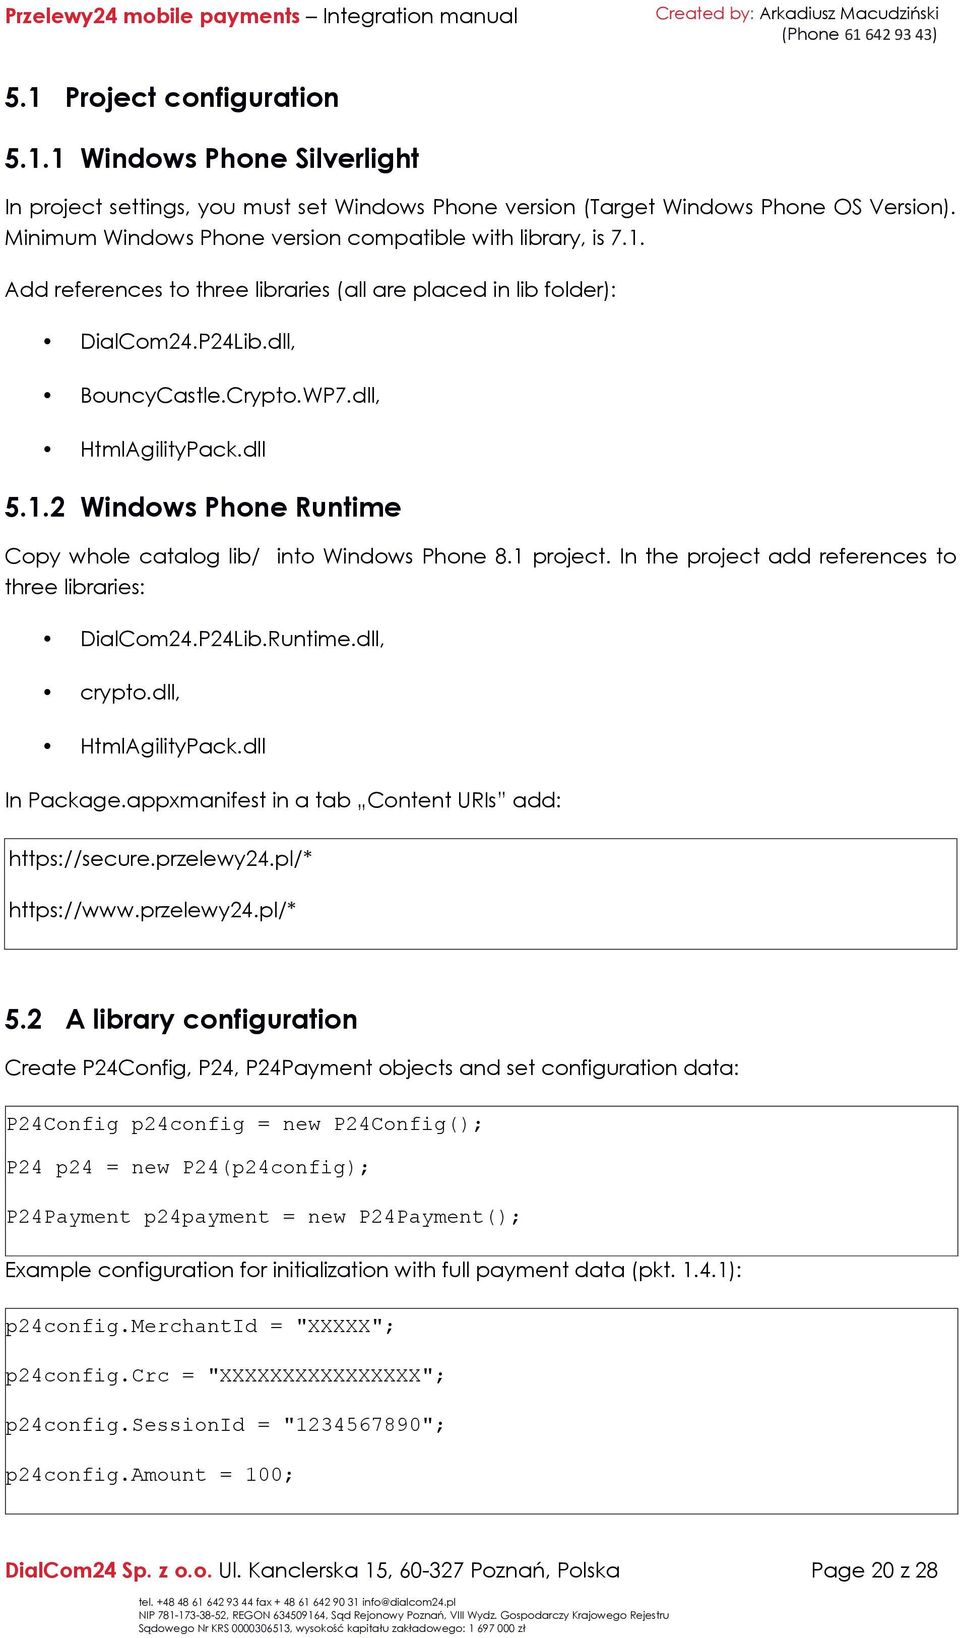 dll 5.1.2 Windows Phone Runtime Copy whole catalog lib/ into Windows Phone 8.1 project. In the project add references to three libraries: DialCom24.P24Lib.Runtime.dll, crypto.dll, HtmlAgilityPack.